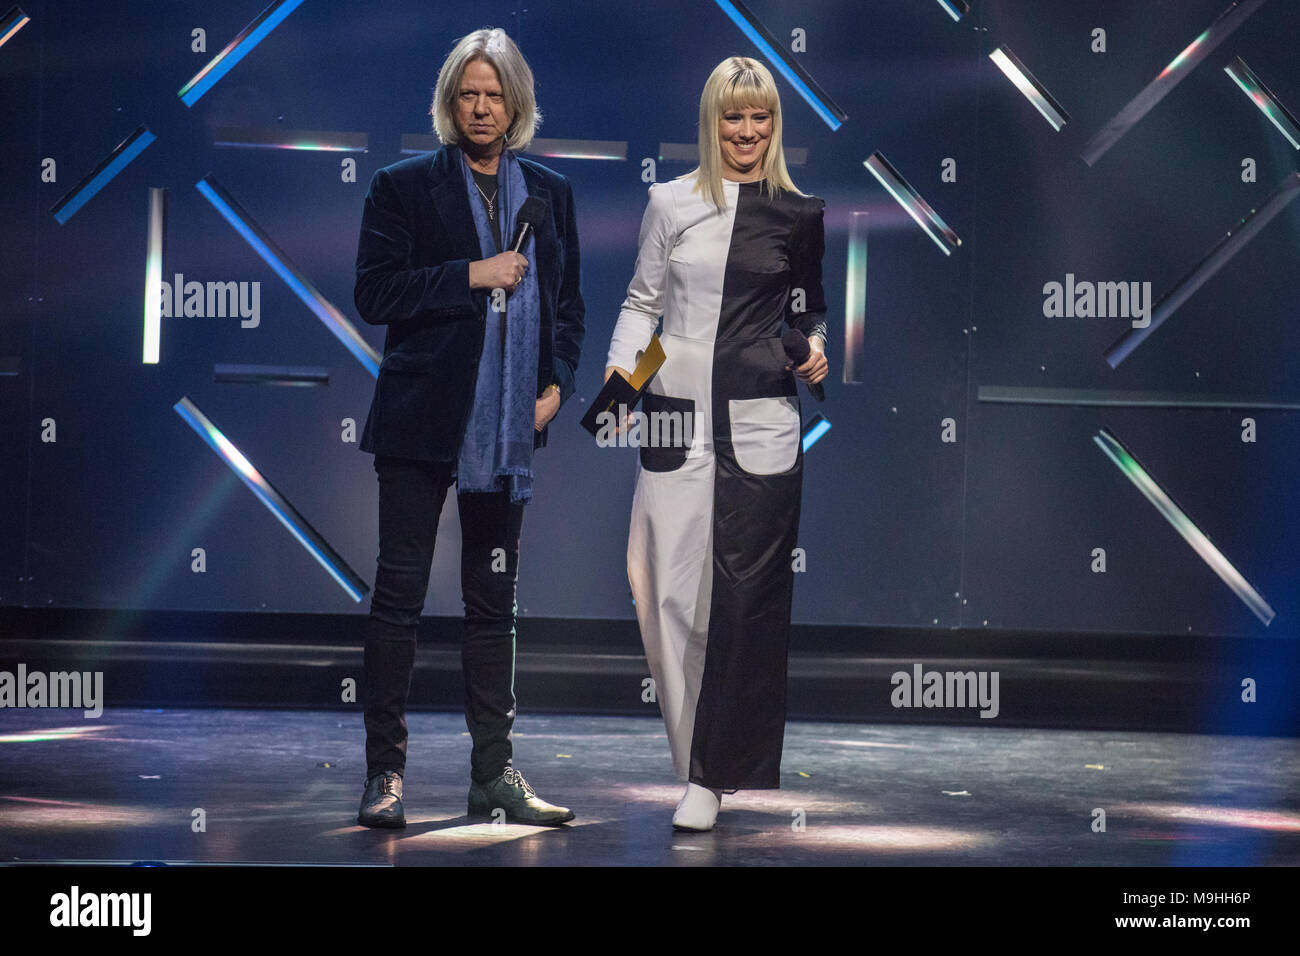 Norway, Oslo - February 25, 2018. The Norwegian singers Aslag Haugen and Dagny present an award during the Norwegian Grammy Awards, Spellemannprisen 2017, at Oslo Konserthus in Oslo. (Photo credit: Gonzales Photo - Stian S. Moller). Stock Photo